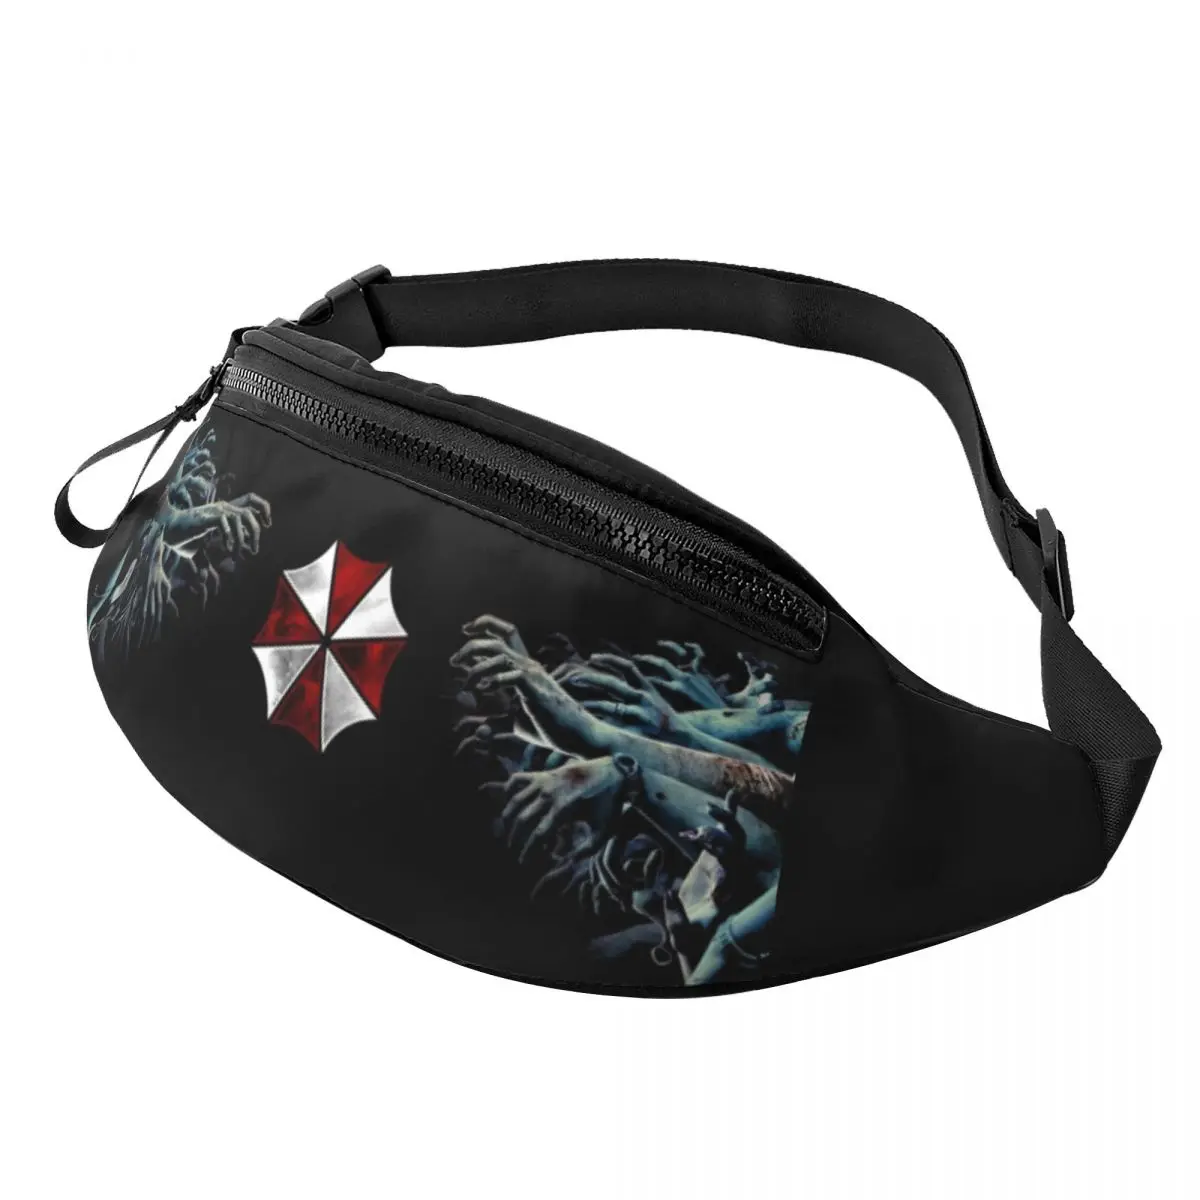 

Umbrella Corporations Fanny Pack Women Men Casual Horror Zombie Video Game Crossbody Waist Bag for Hiking Phone Money Pouch